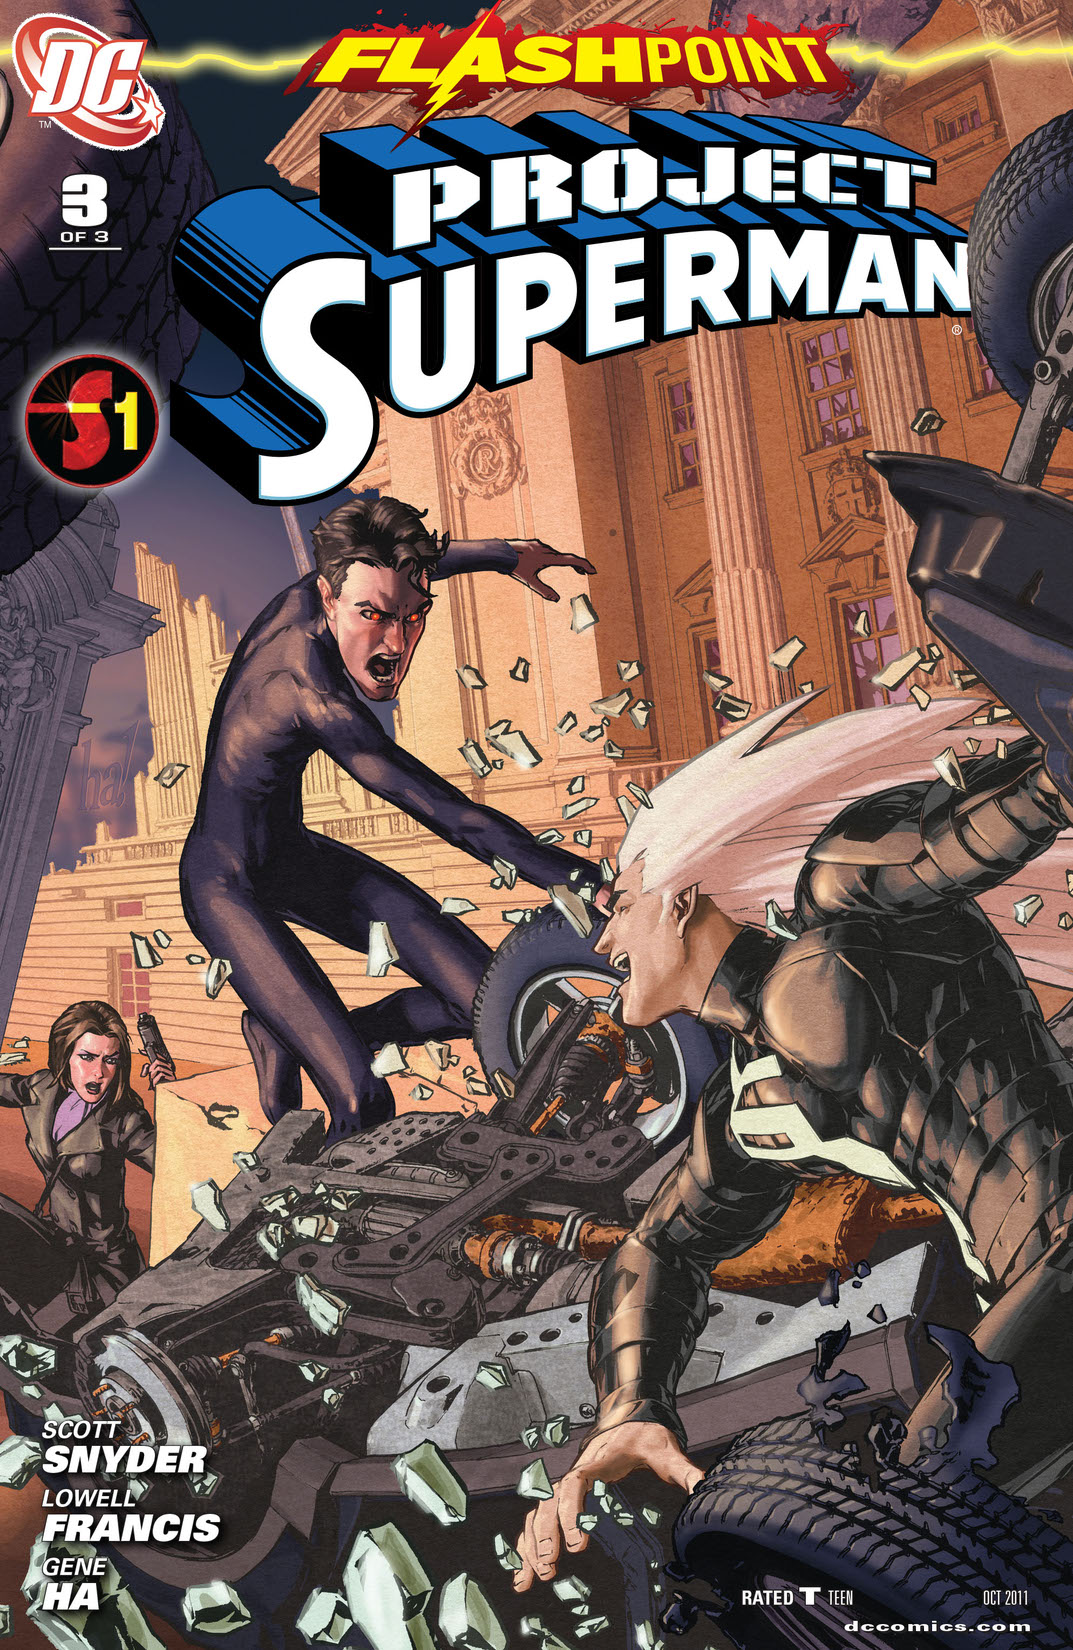 Flashpoint: Project Superman #3 preview images